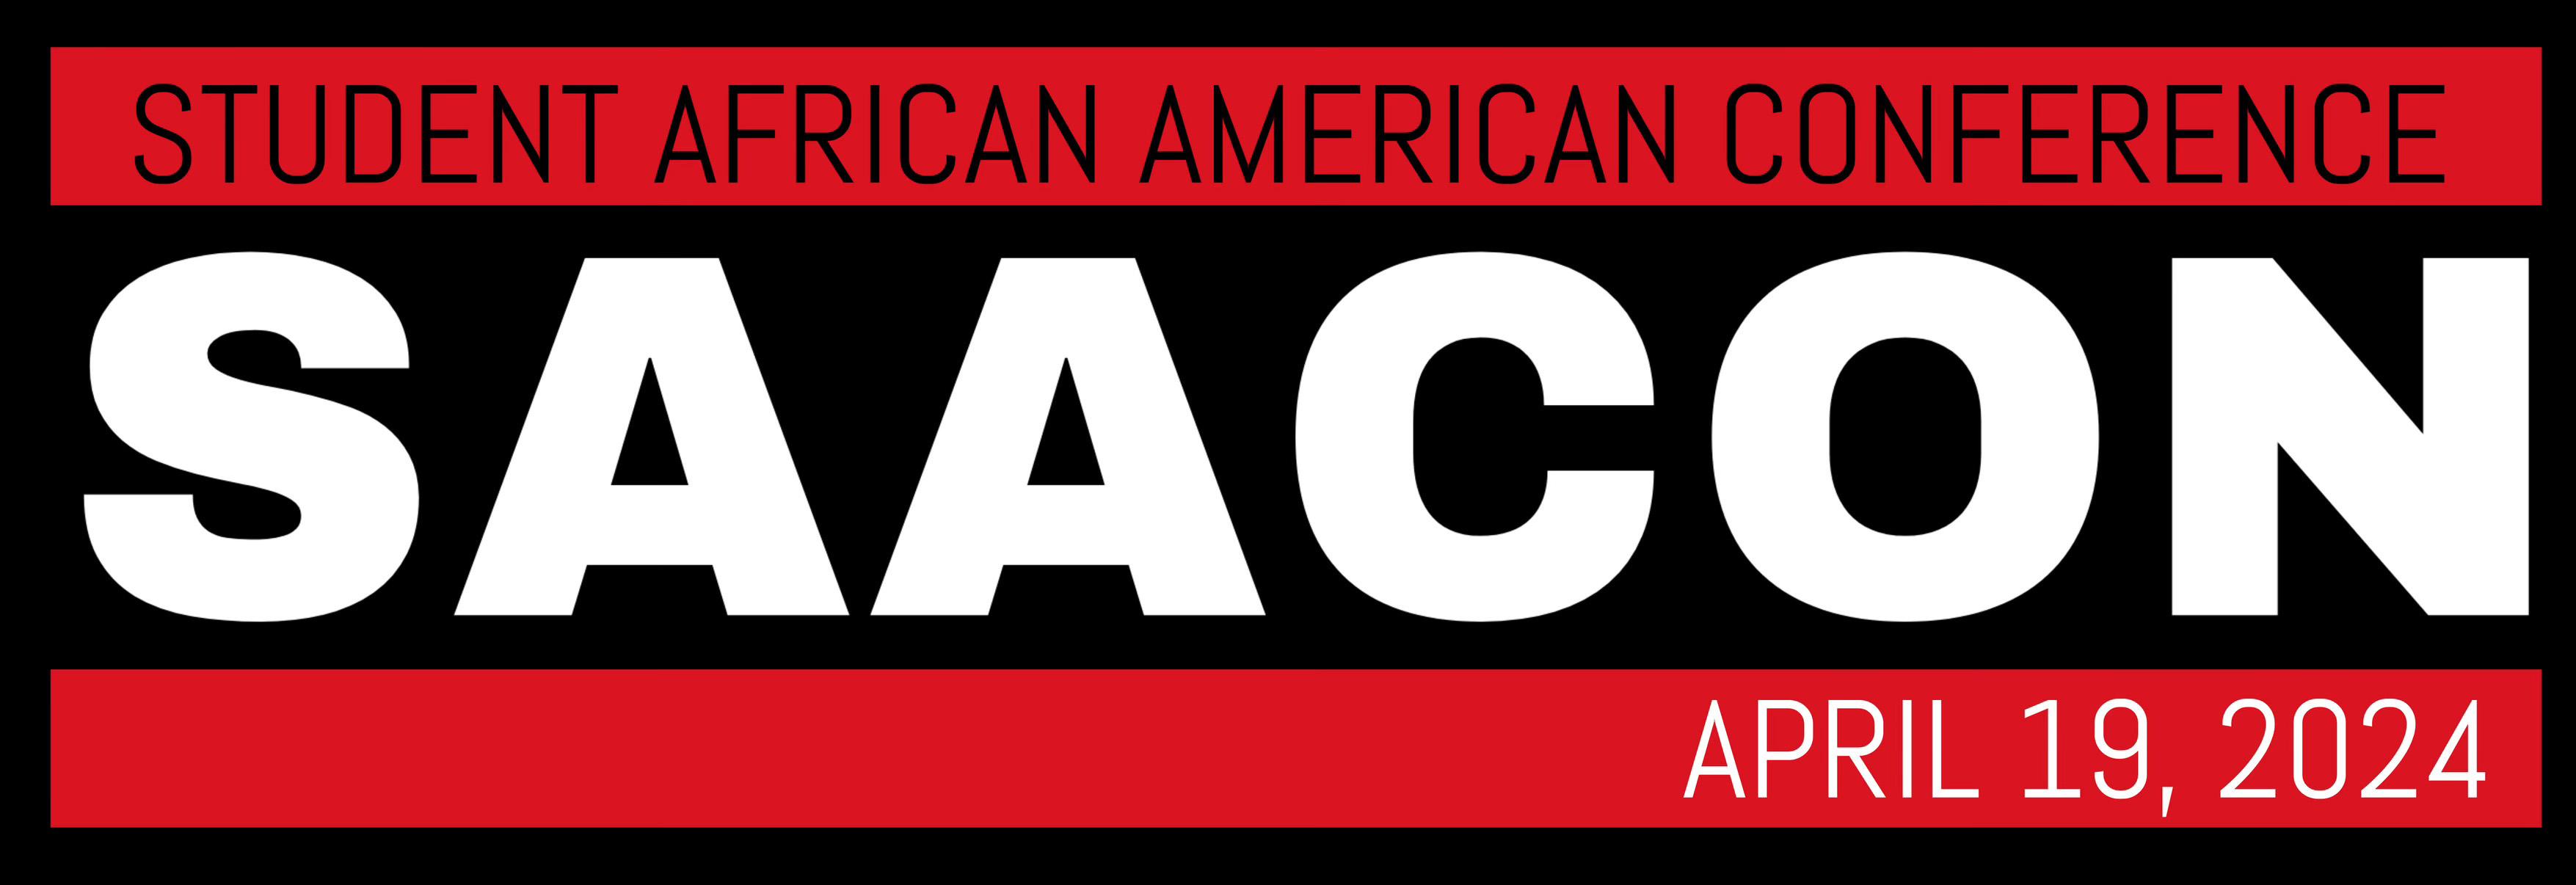 District 88 hosts Student African American Conference (SAACON)